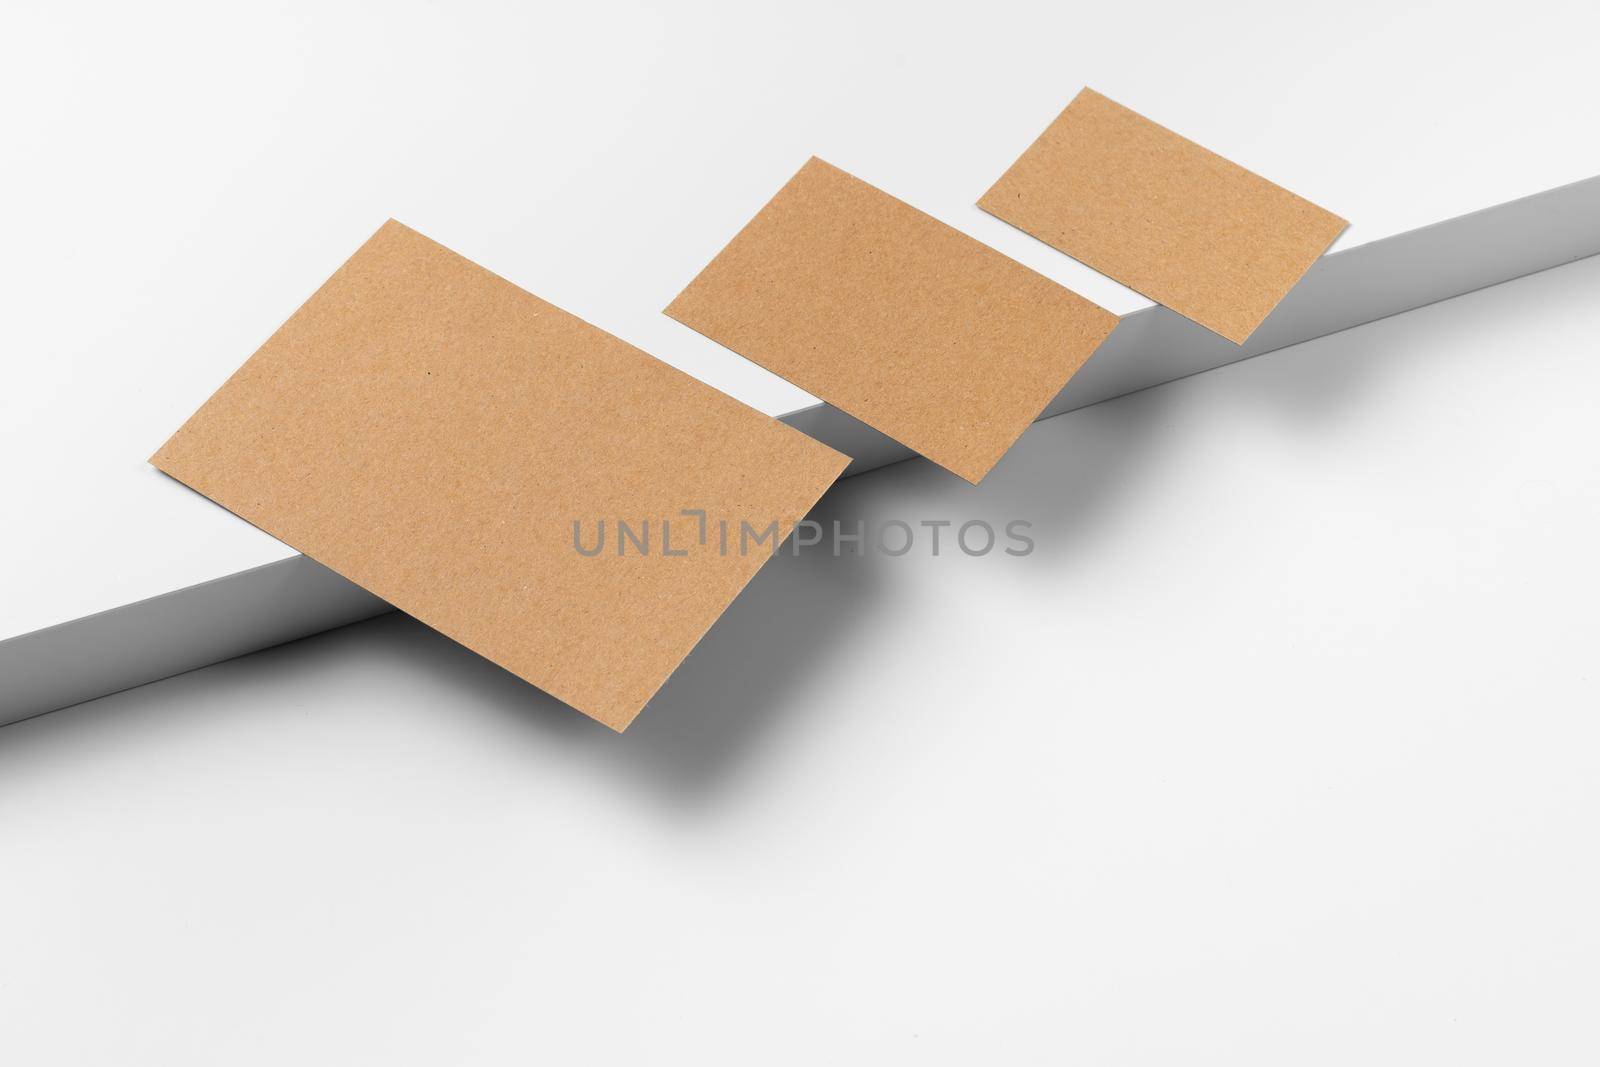 Empty craft business cards on white background. by Fabrikasimf